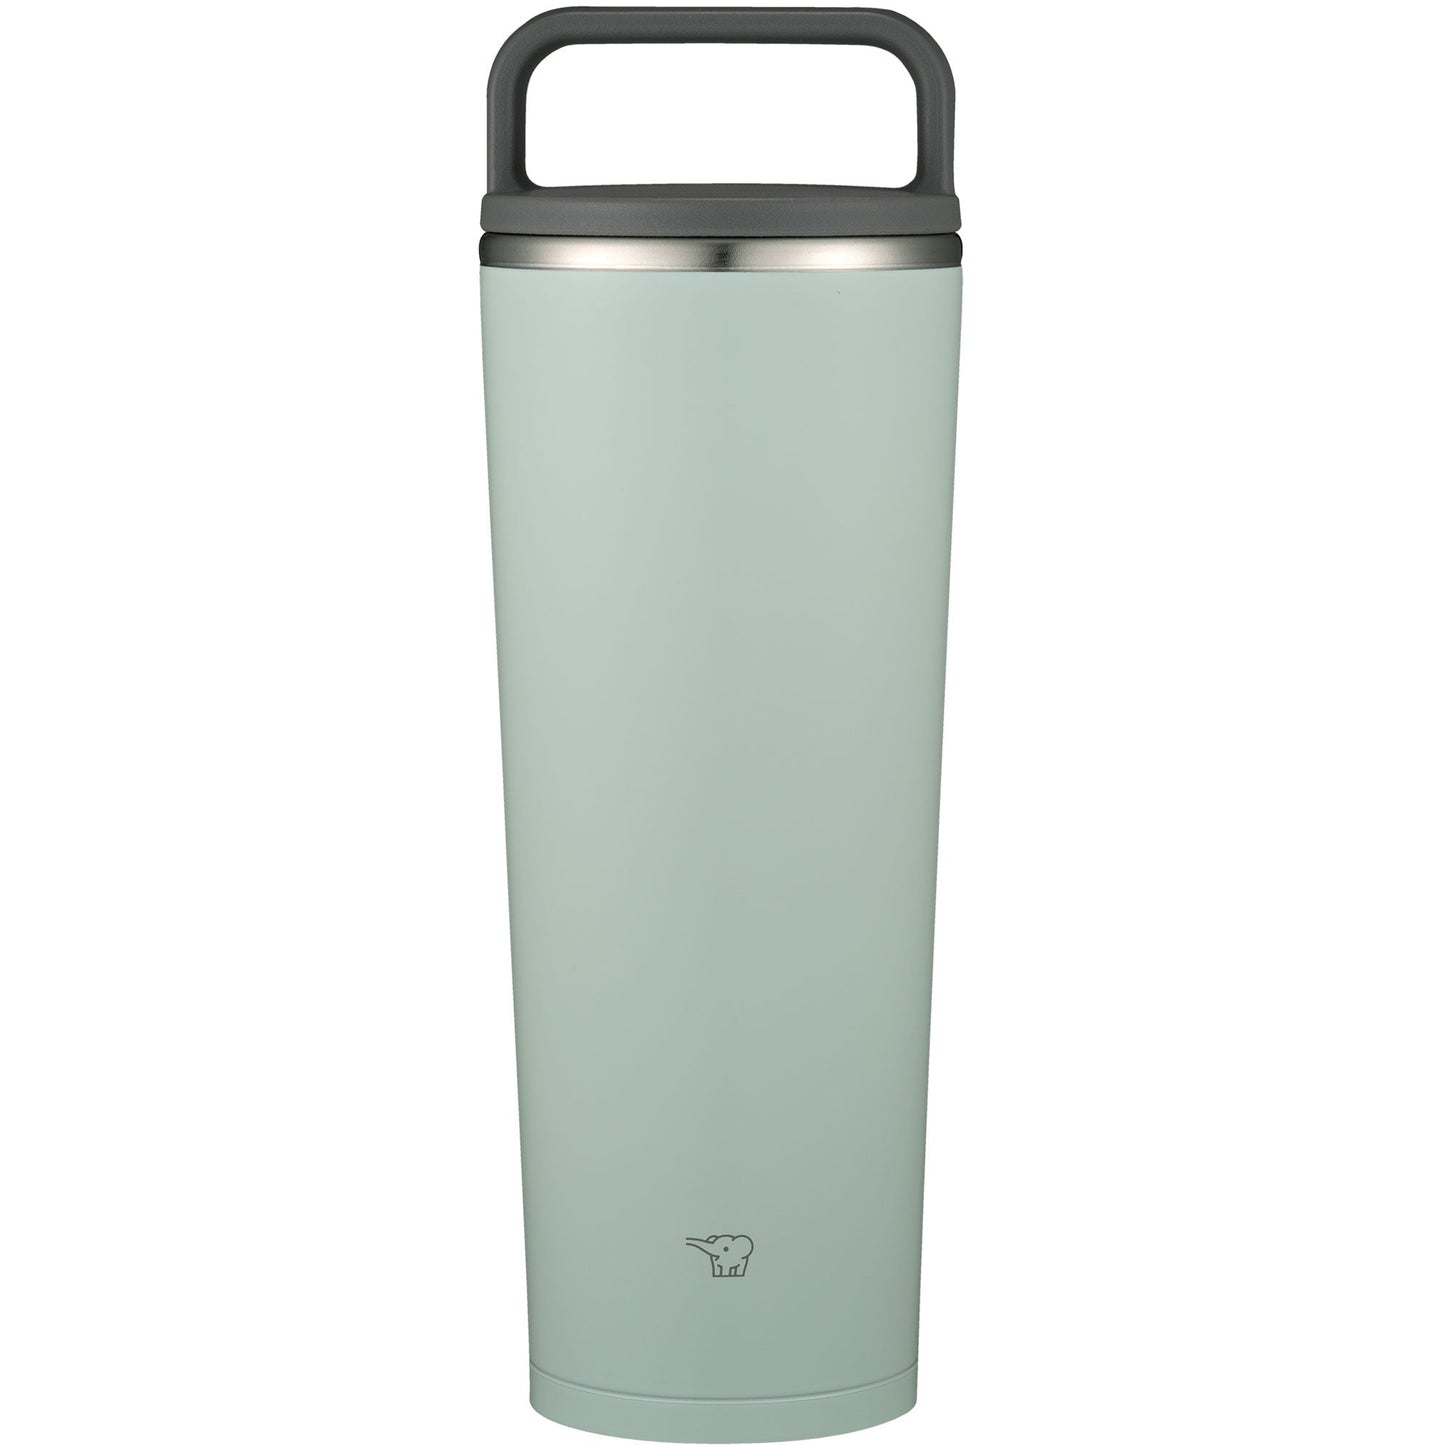 Zojirushi Stainless Carry Tumbler, 14-ounce, Watery Green